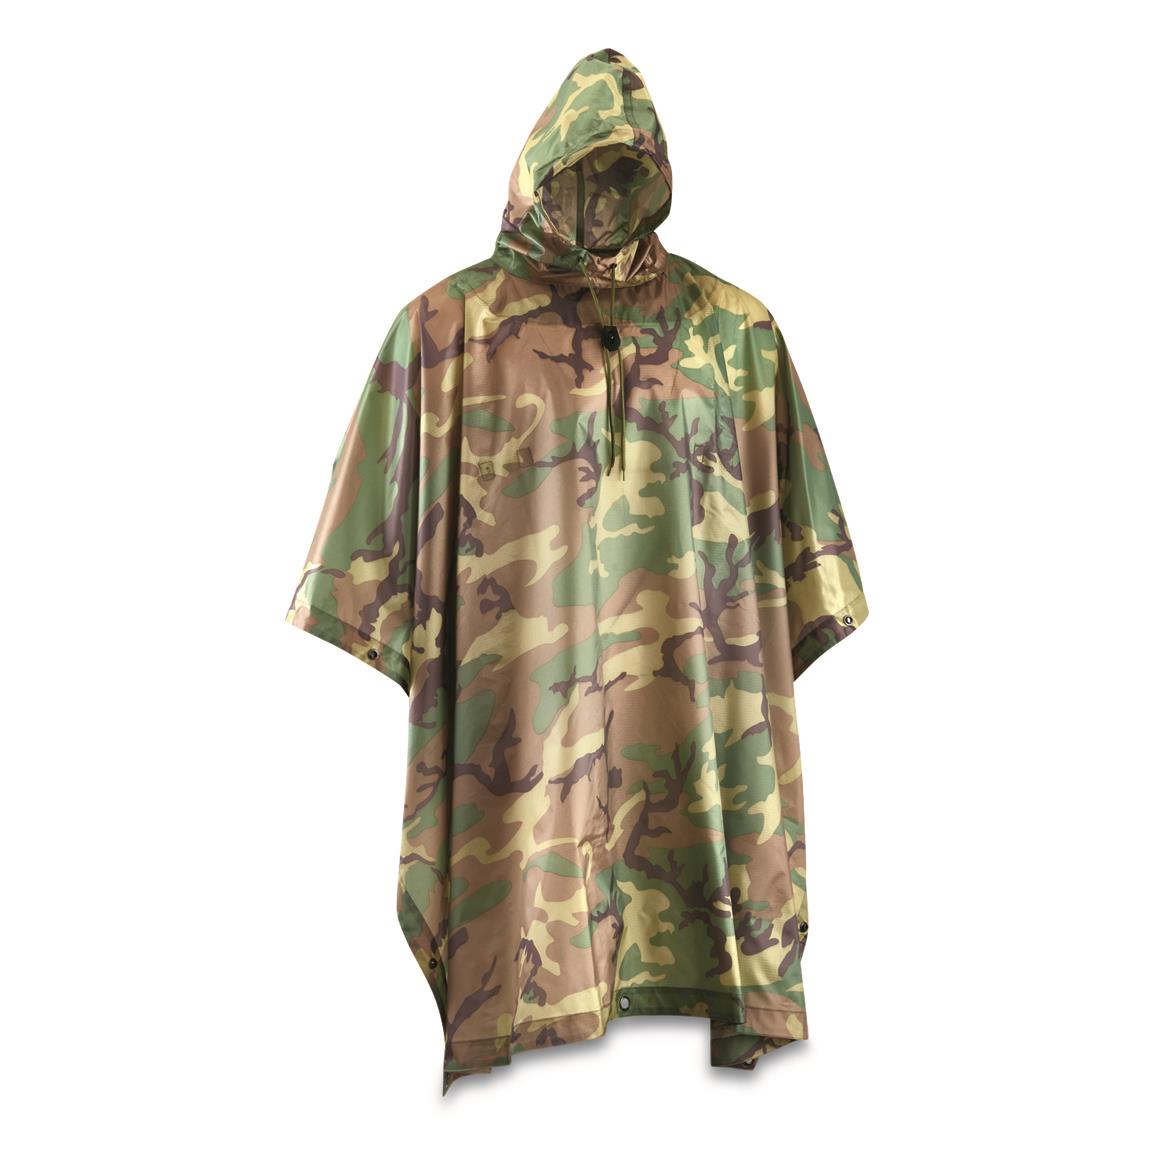 Brooklyn Armed Forces Enhanced Military Poncho with Carrier Bag, Woodland